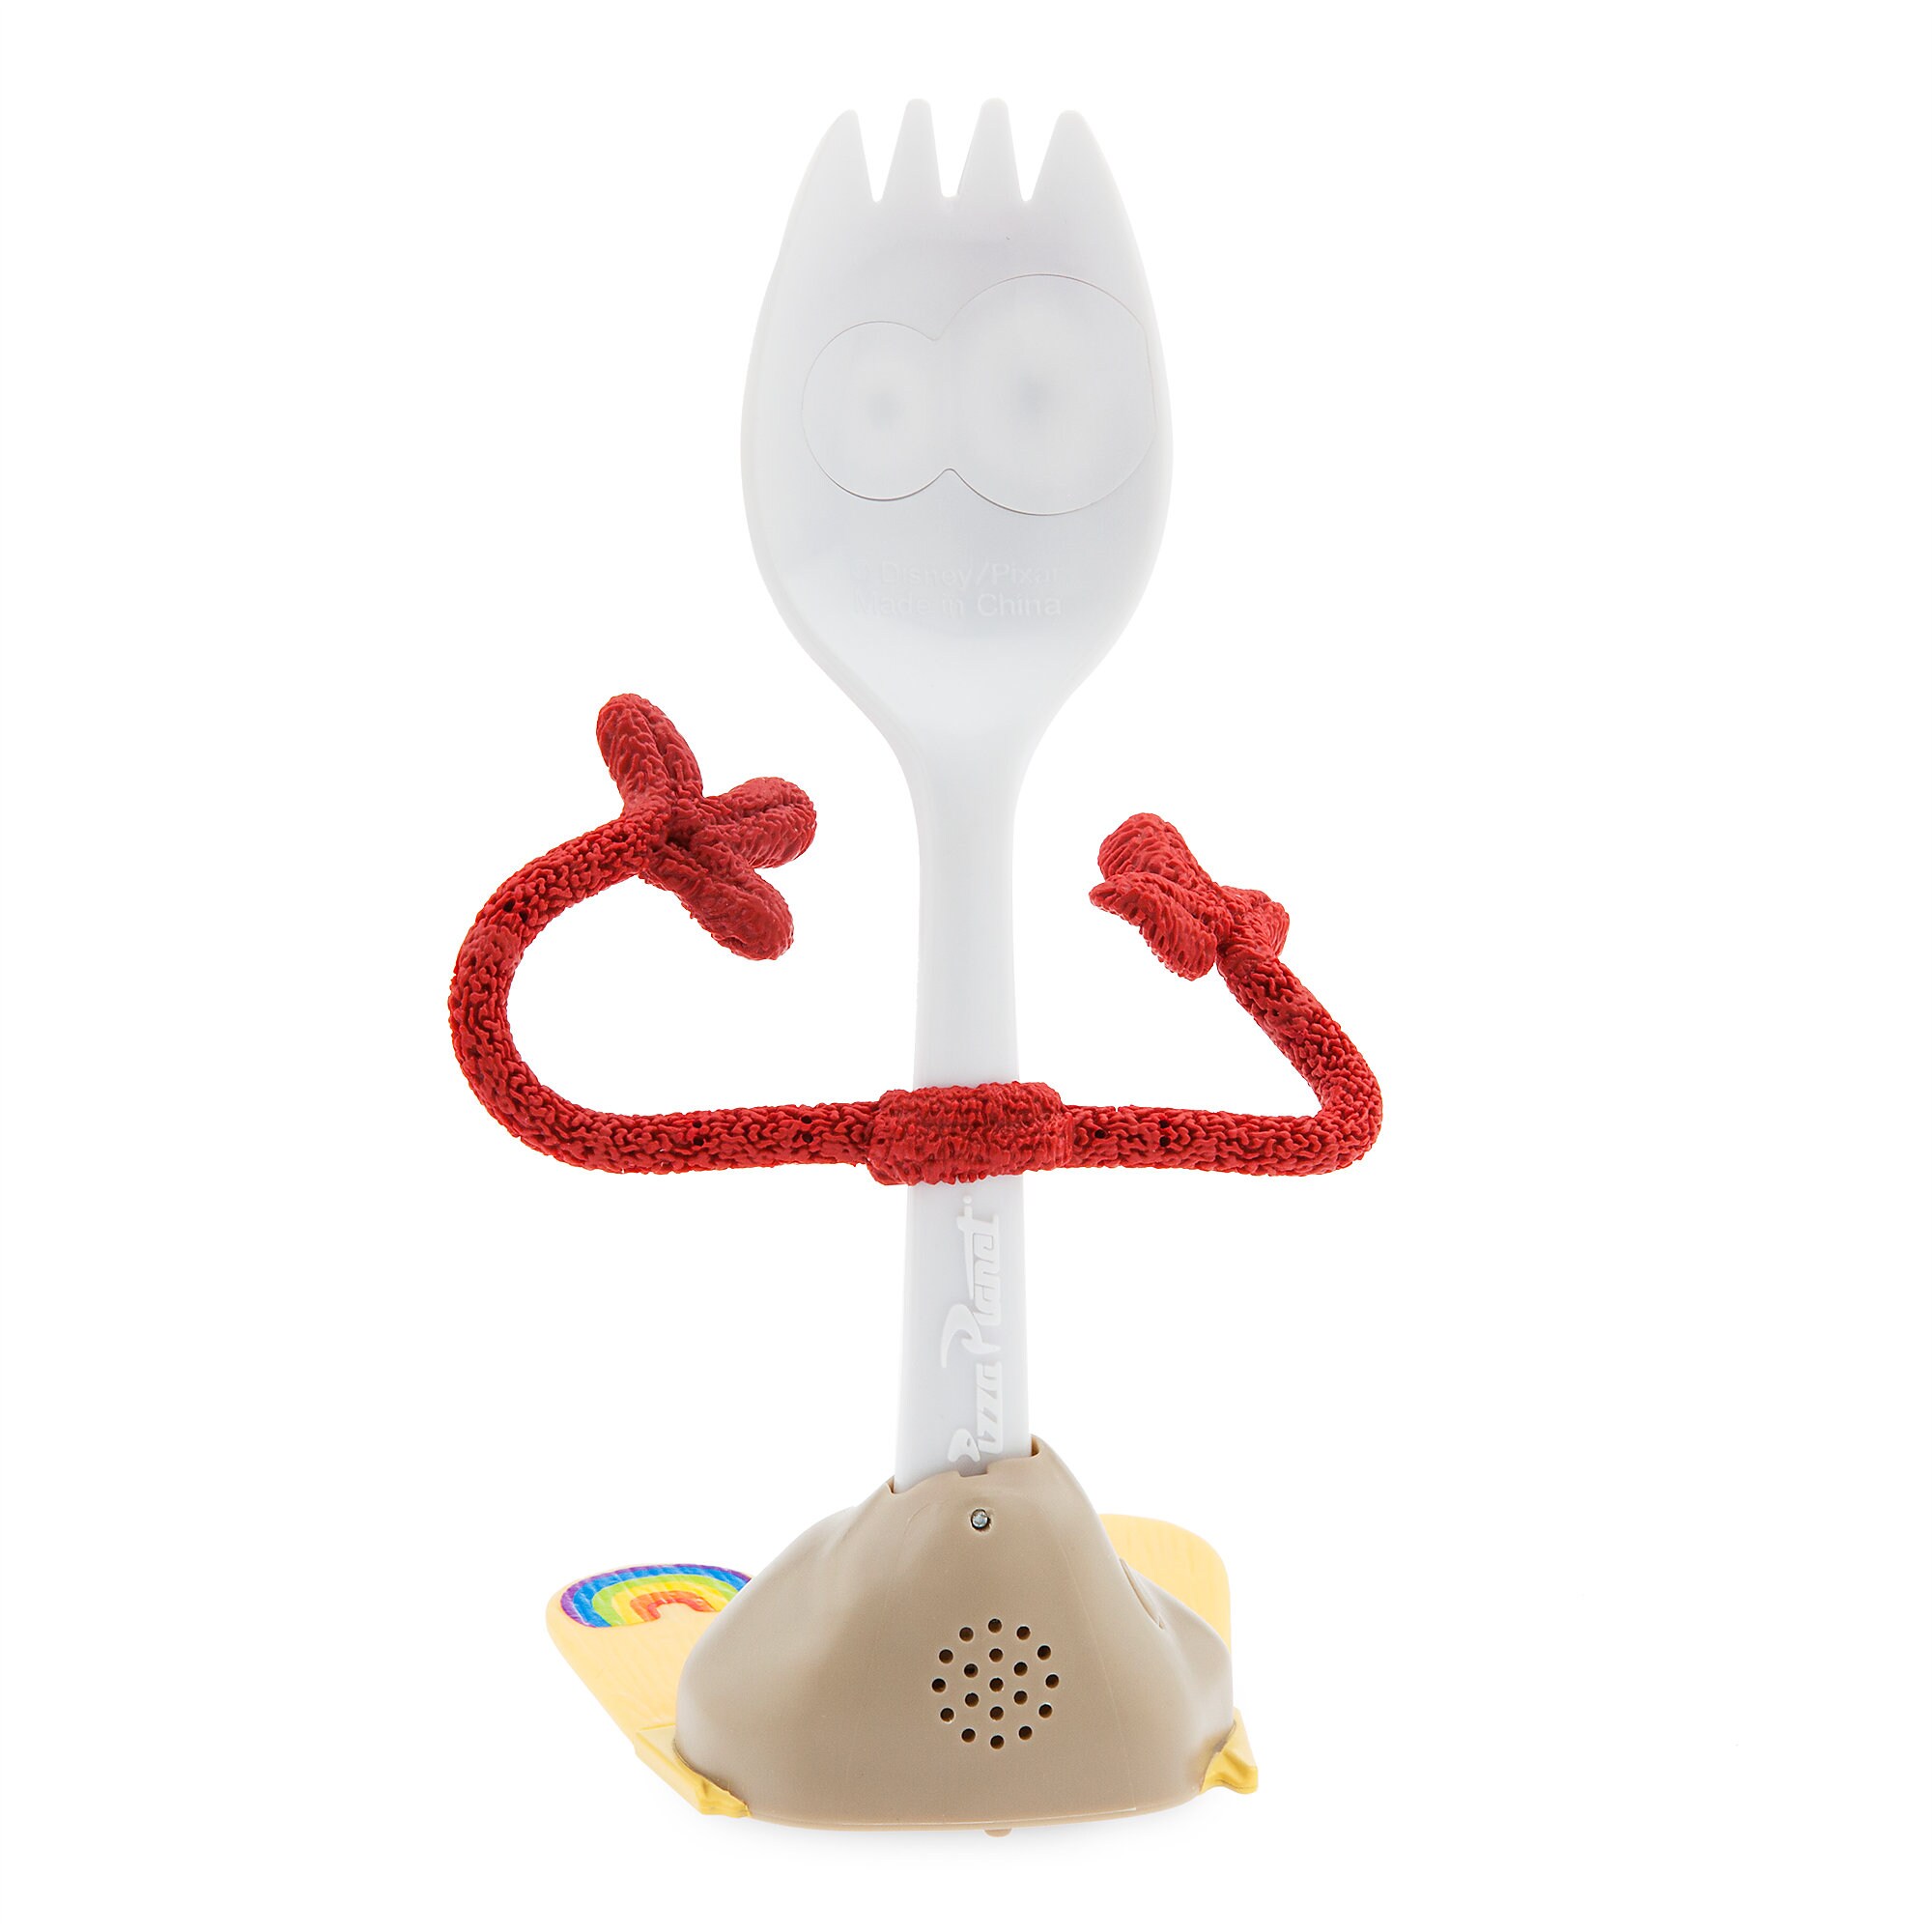 Forky Interactive Talking Action Figure - Toy Story 4 - 7 1/4''